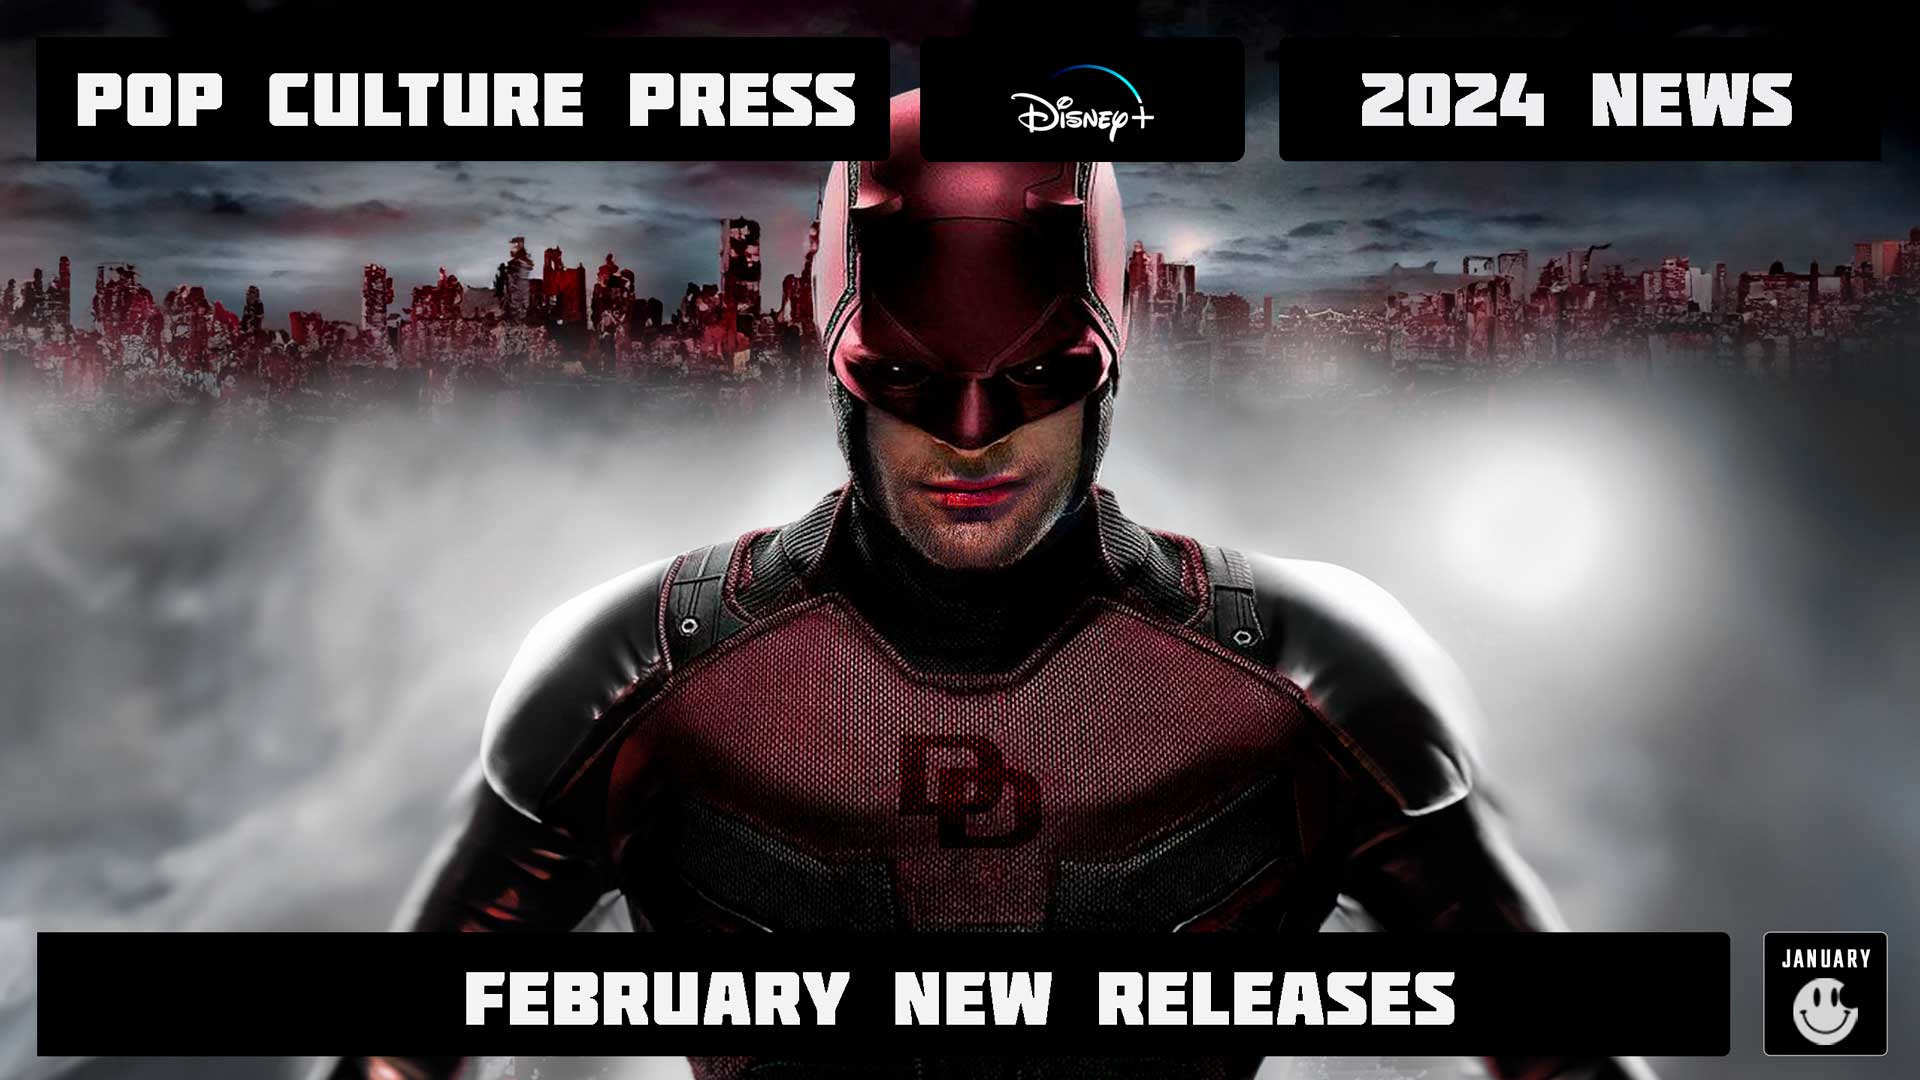 Disney Plus Streaming News and February 2024 New Releases Pop Culture